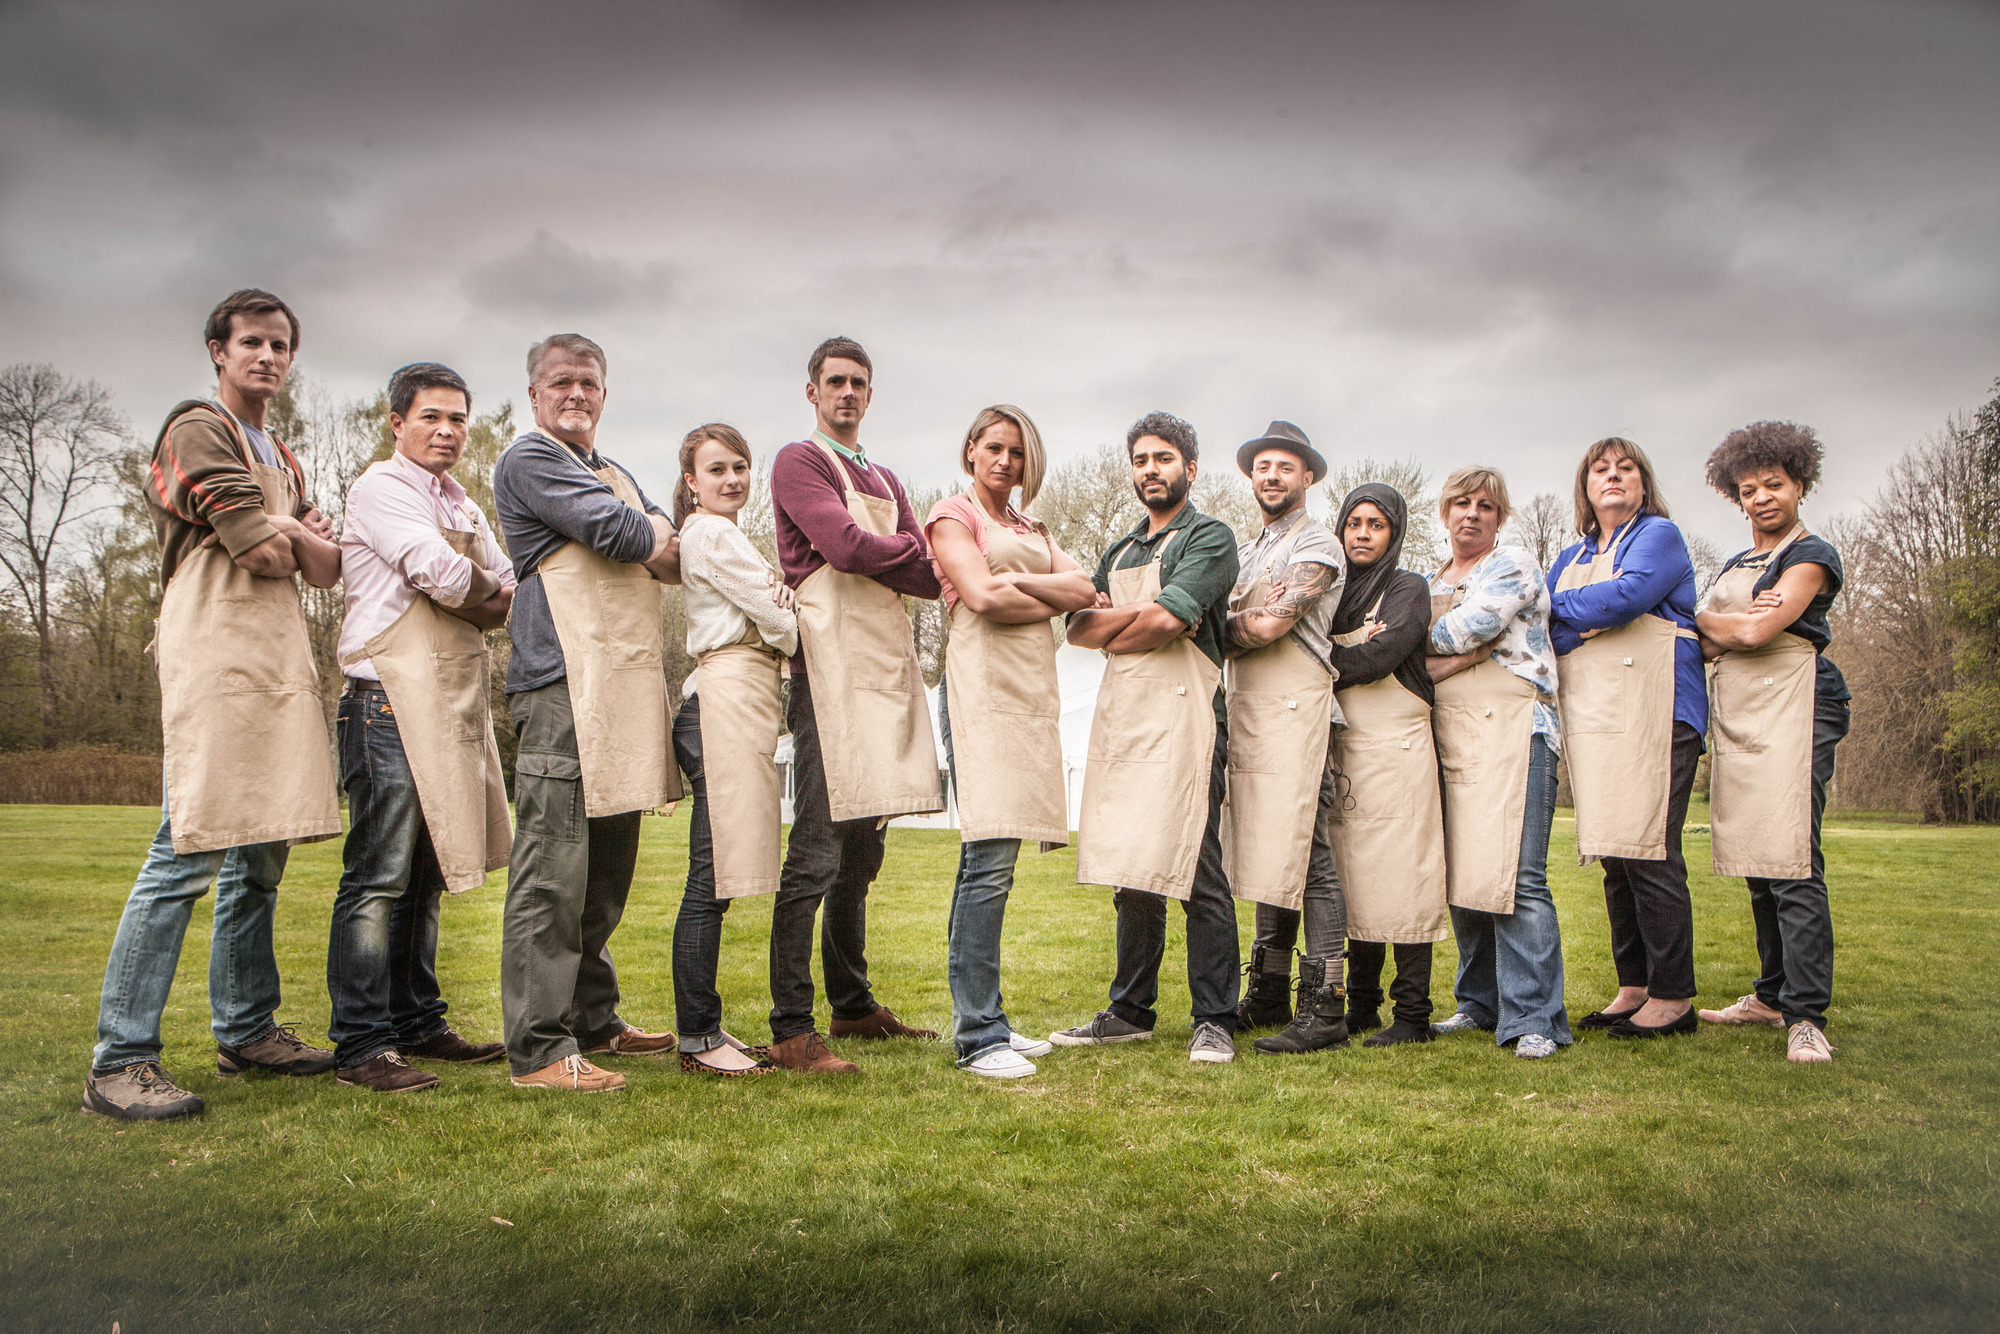 The Great British Bake Off contestants announced Royal Television Society